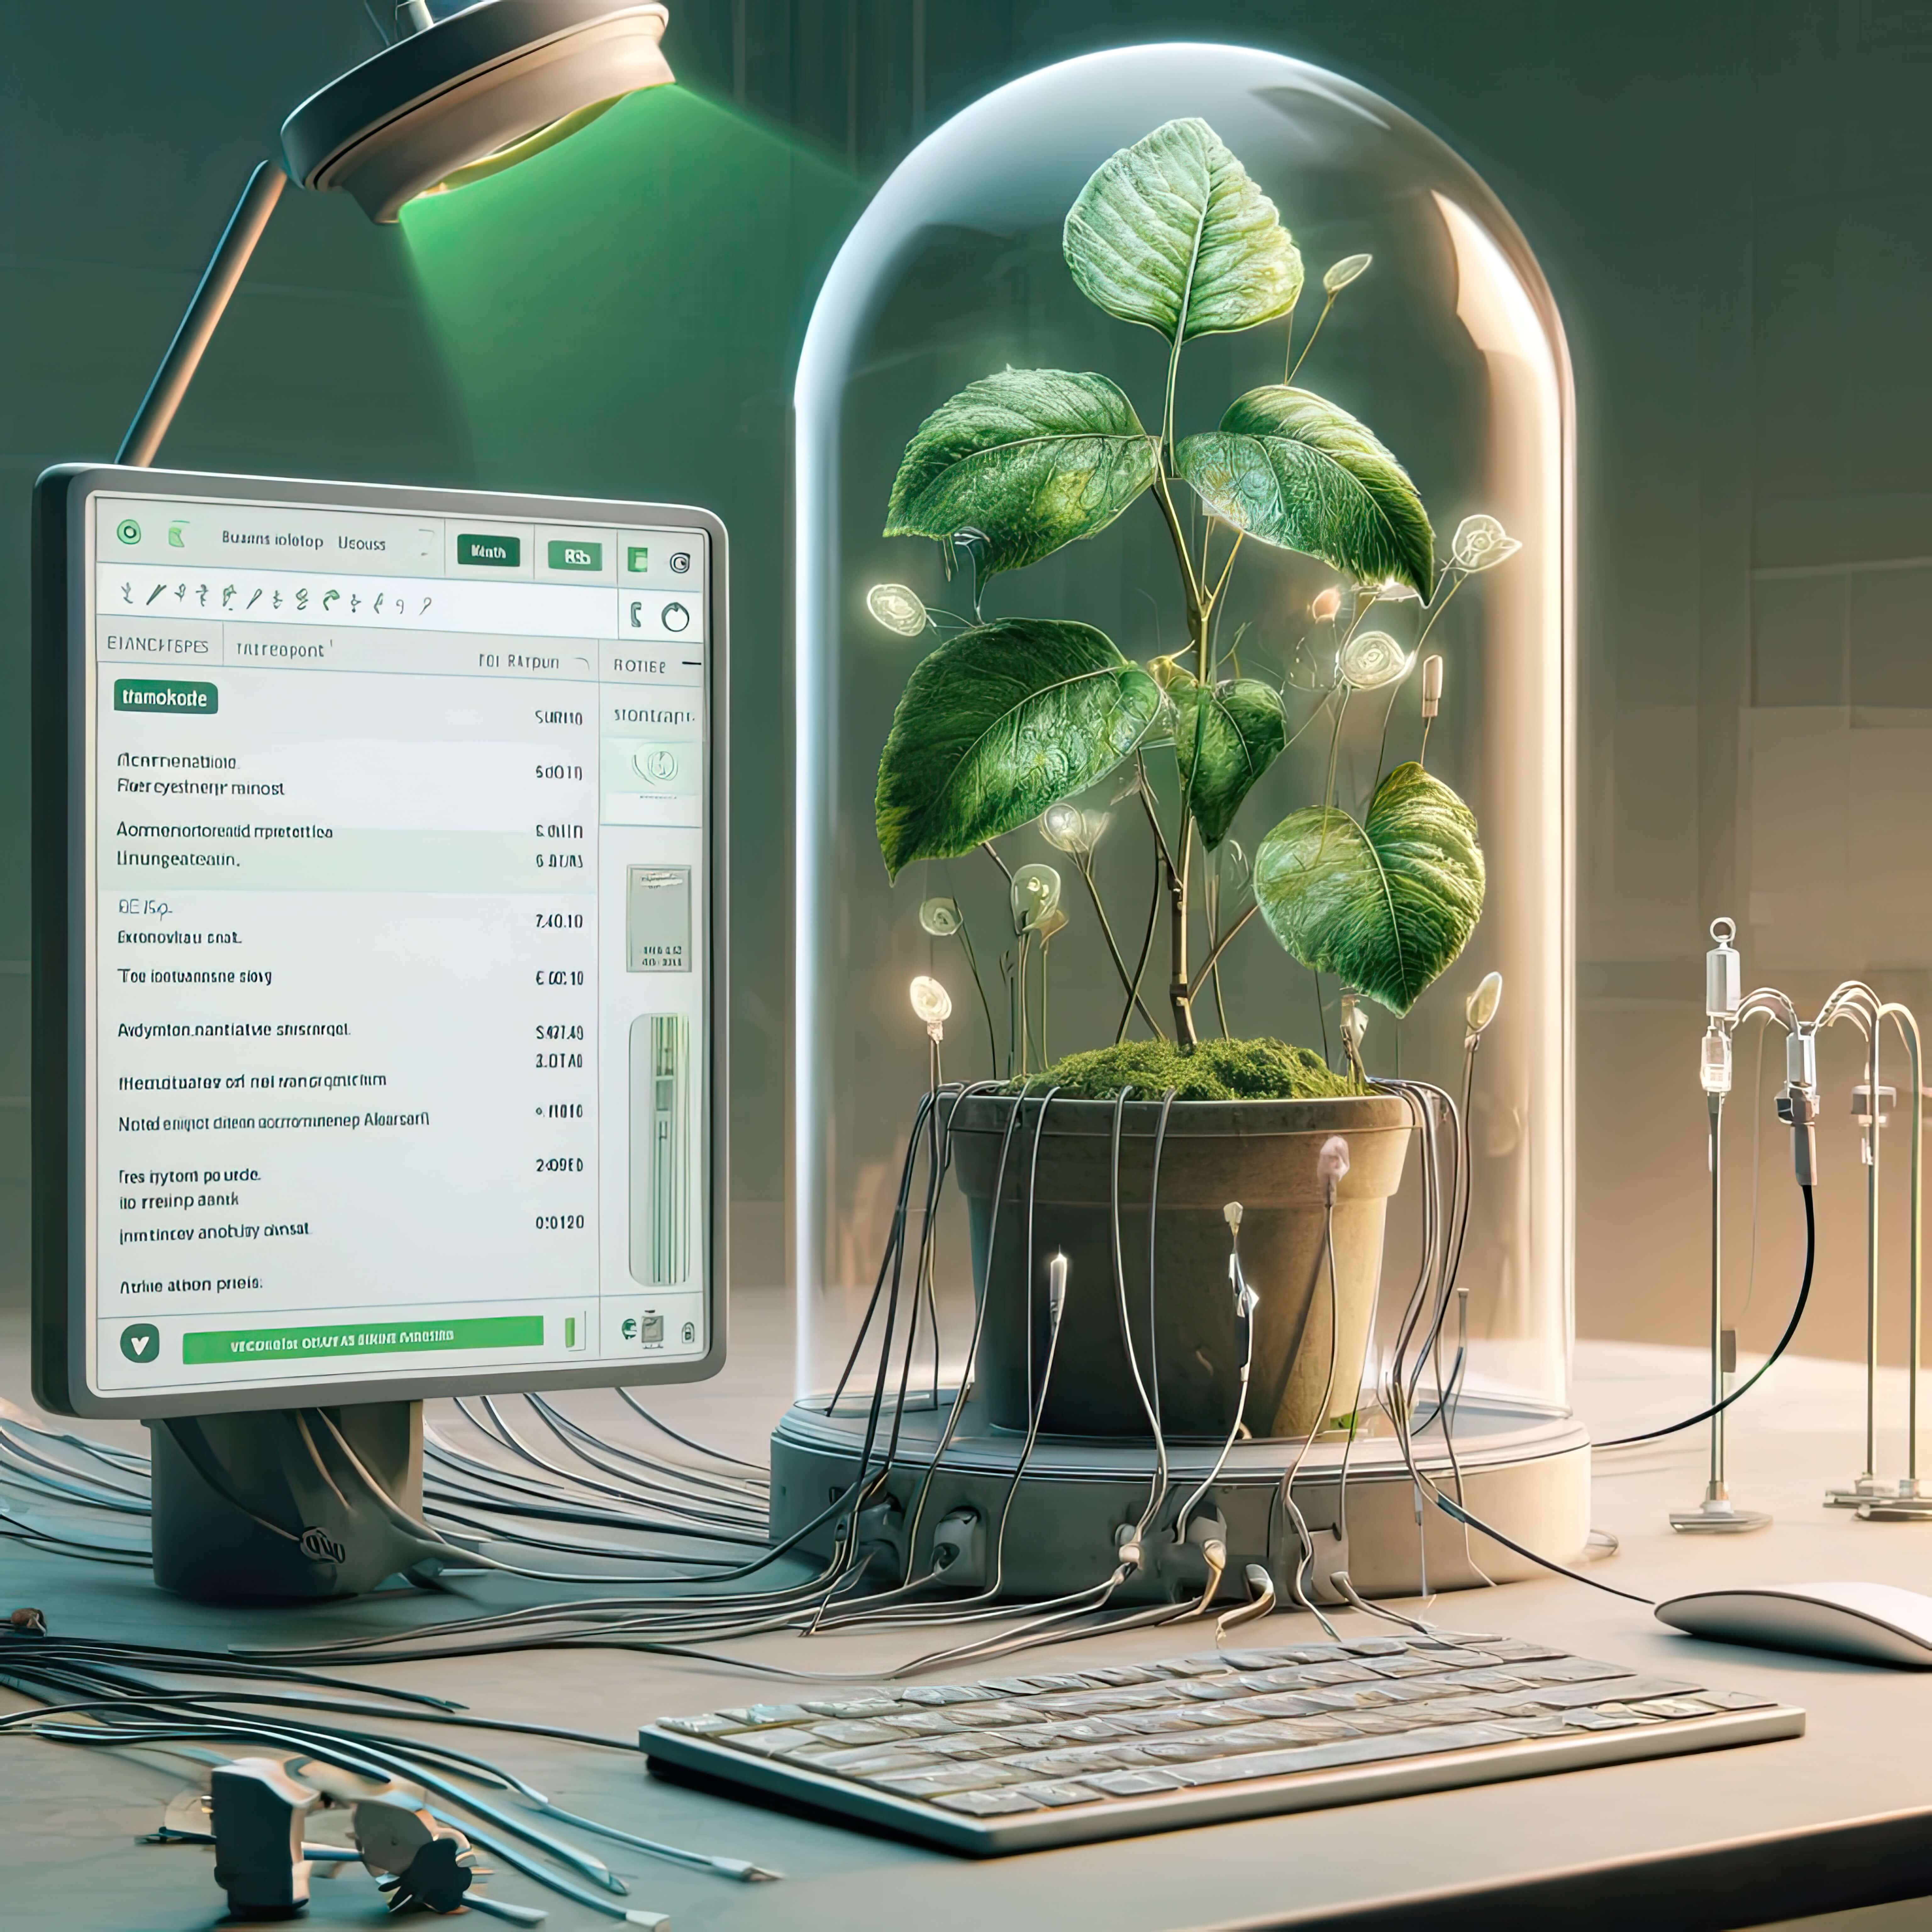 image shows a plant with sensors typing a keyboard